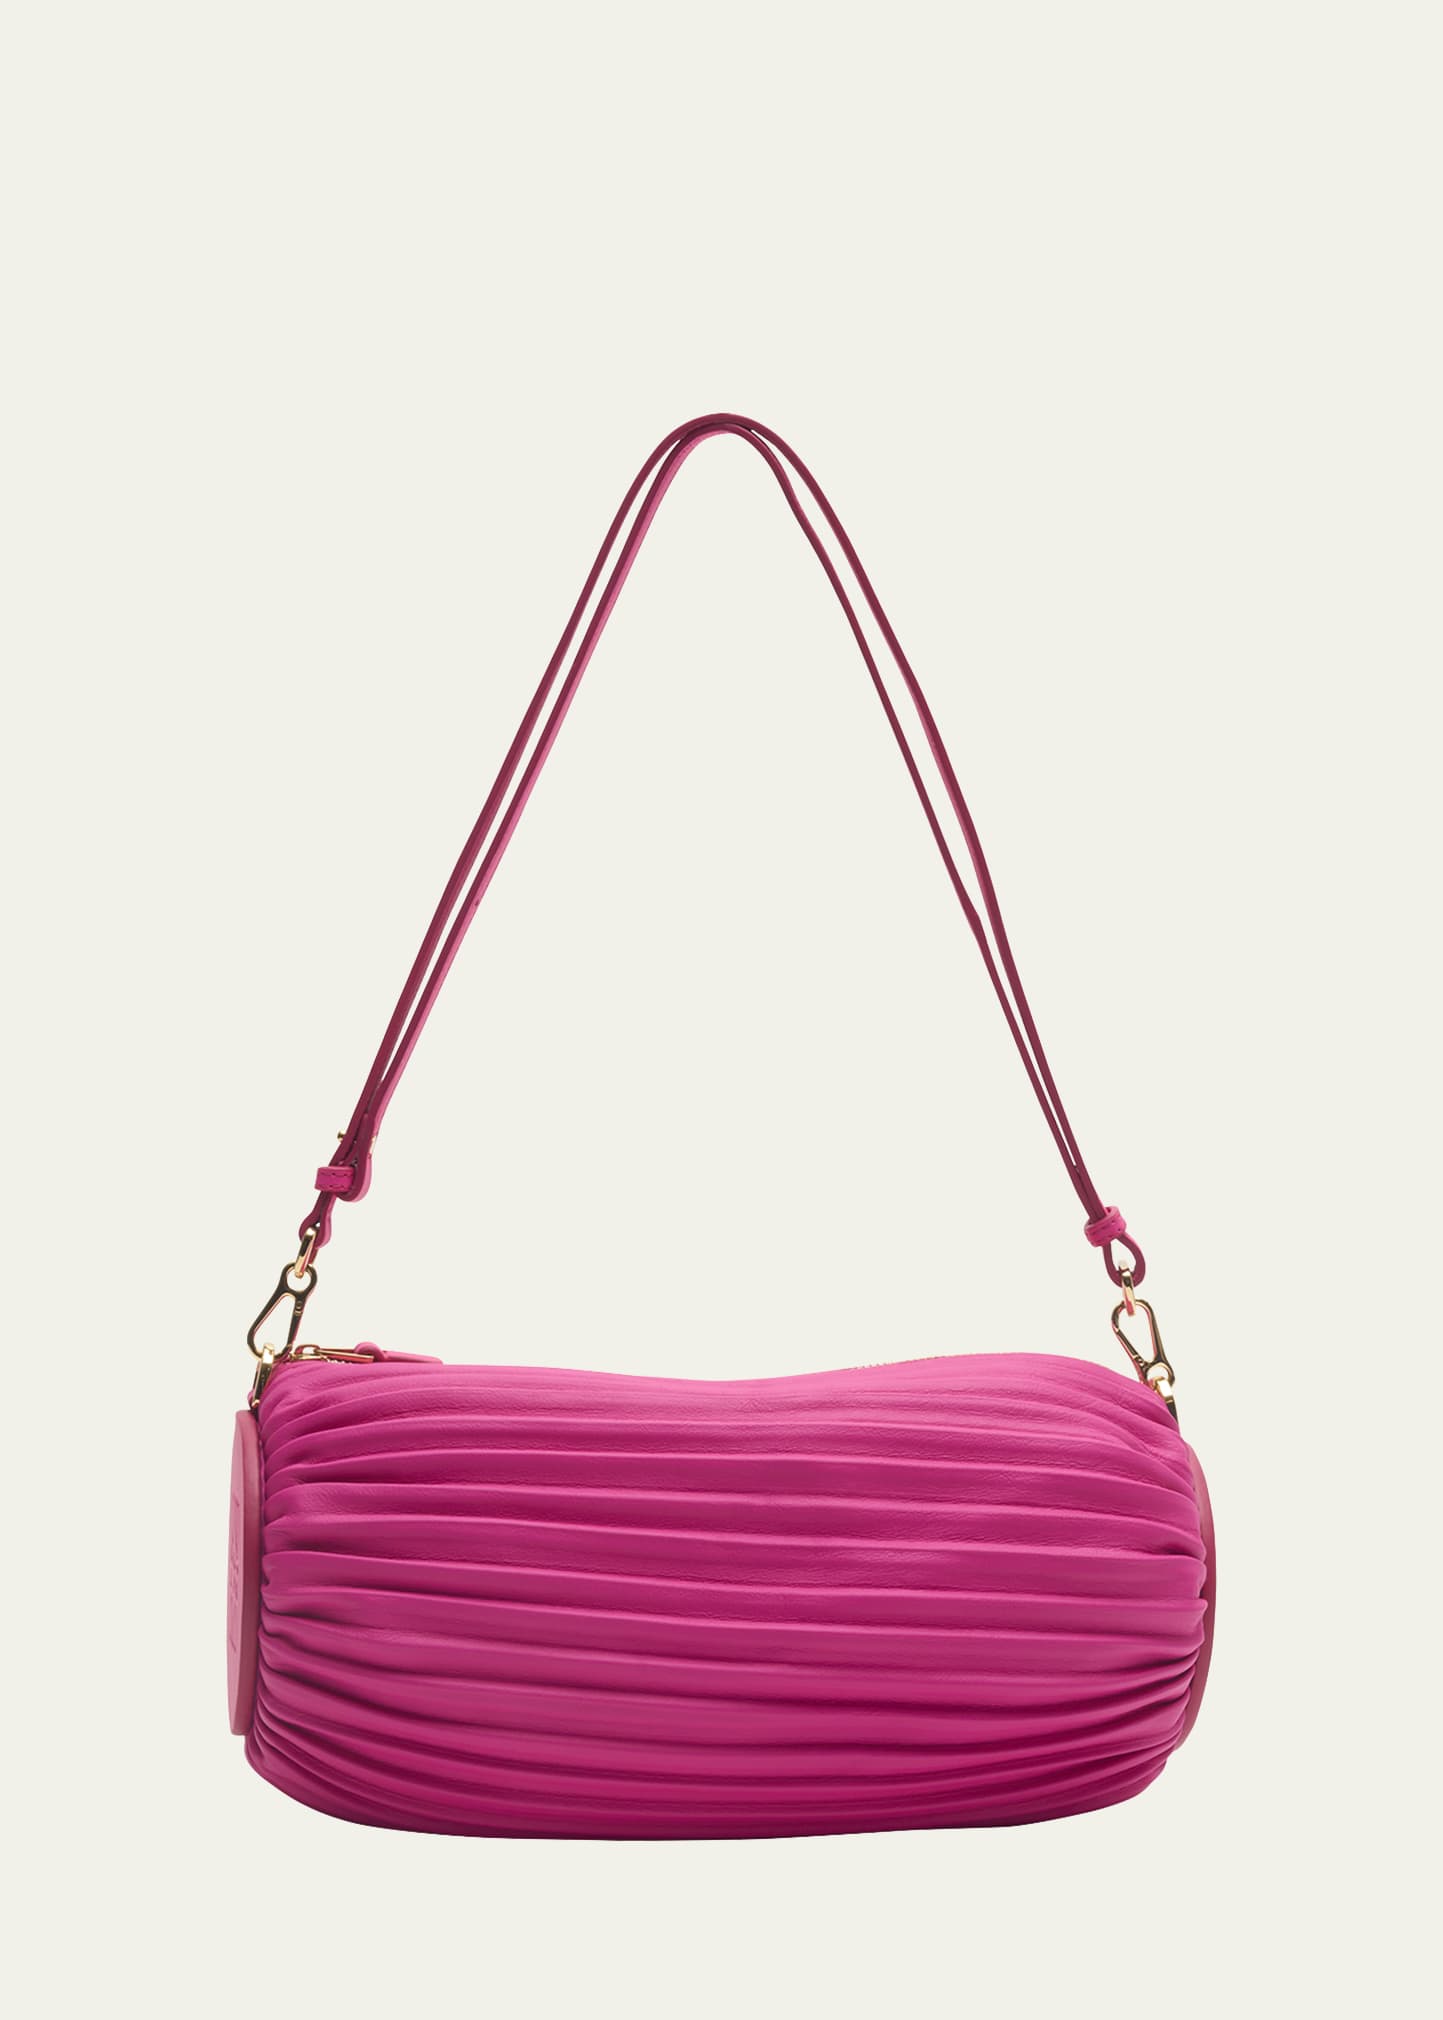 x Paula's Ibiza Bracelet Pouch in Pleated Napa Leather with Leather Strap